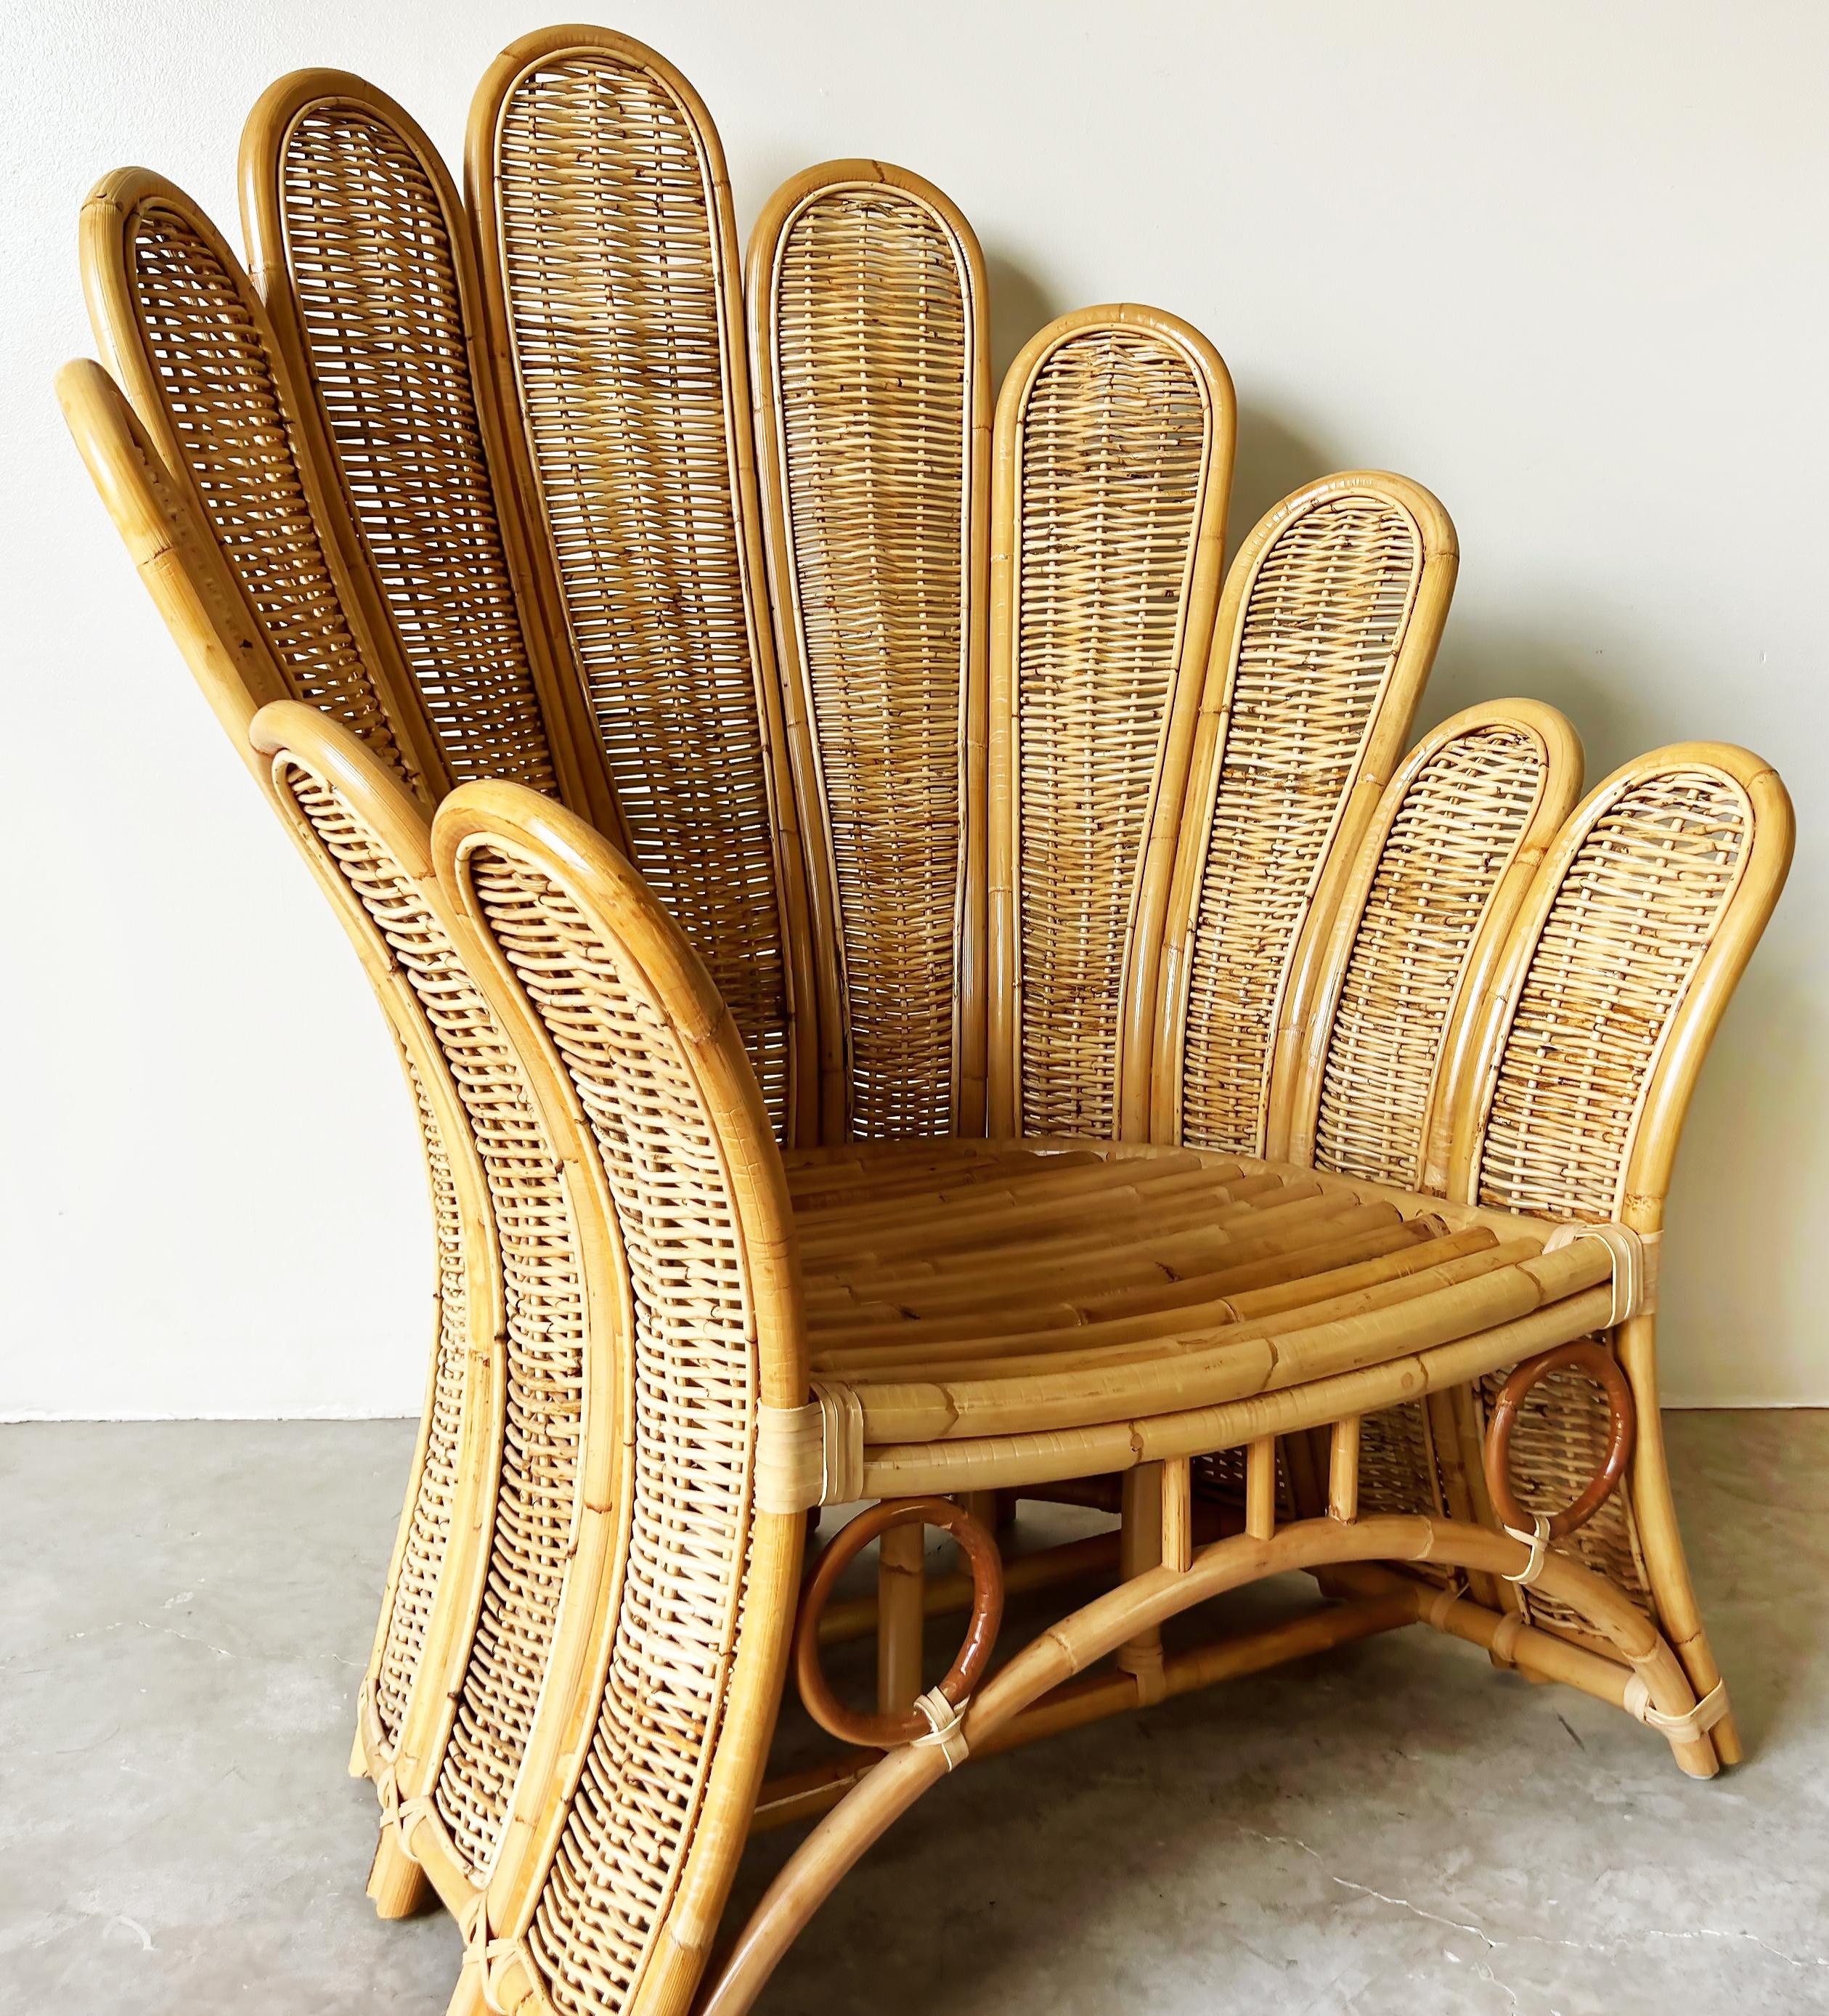 Hand-Woven Vintage Mid-Century Rattan Peacock Fan Back Chair